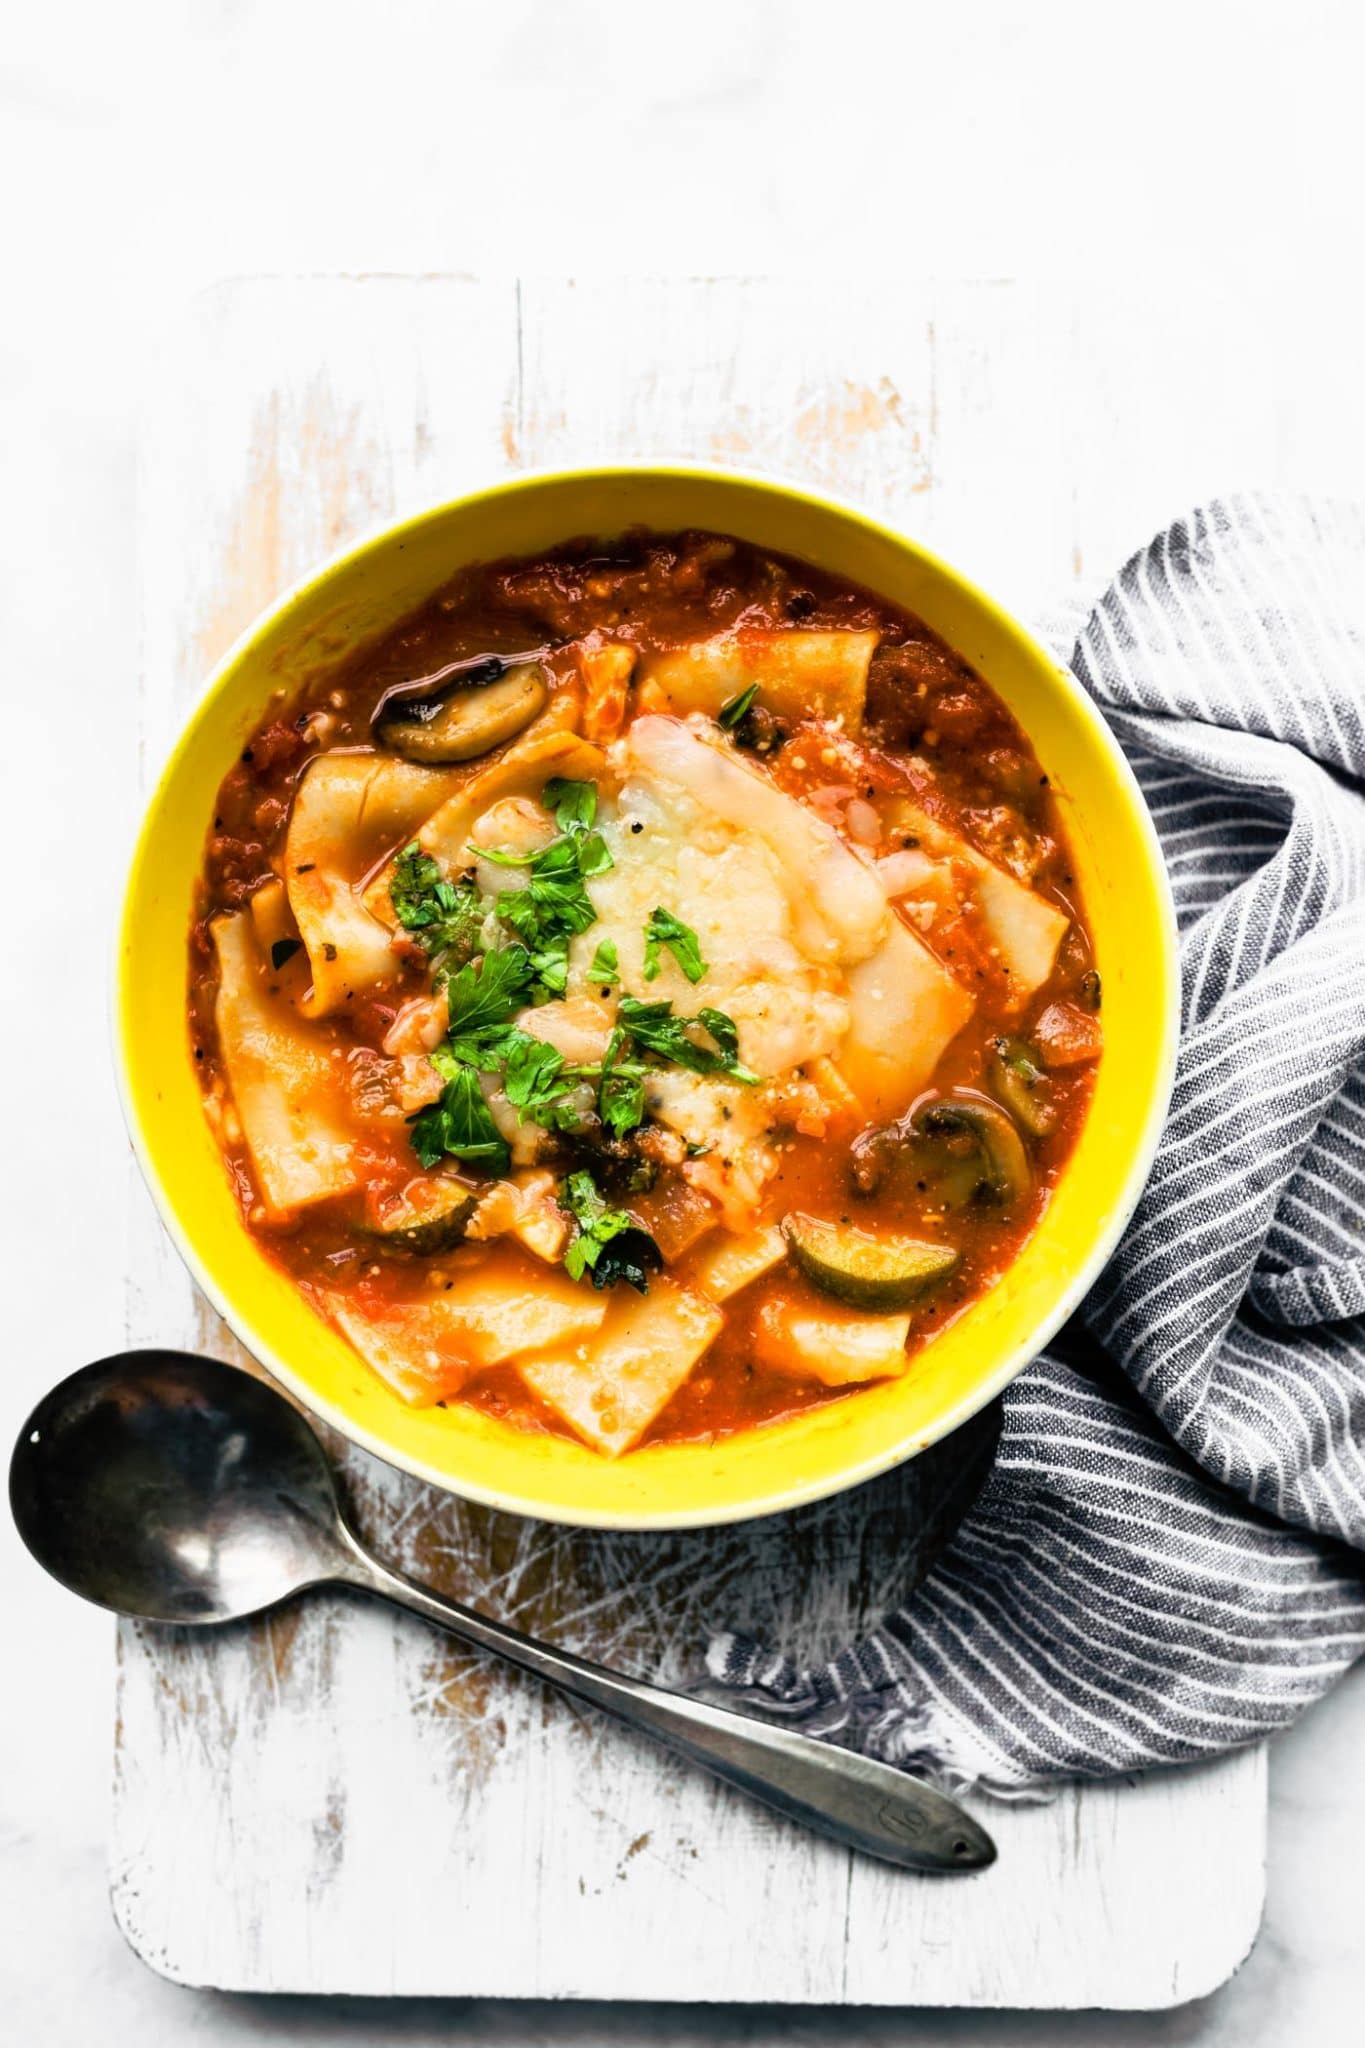 lasagna soup in a yellow bowl sitting on a board next to a spoon and blue and white towel